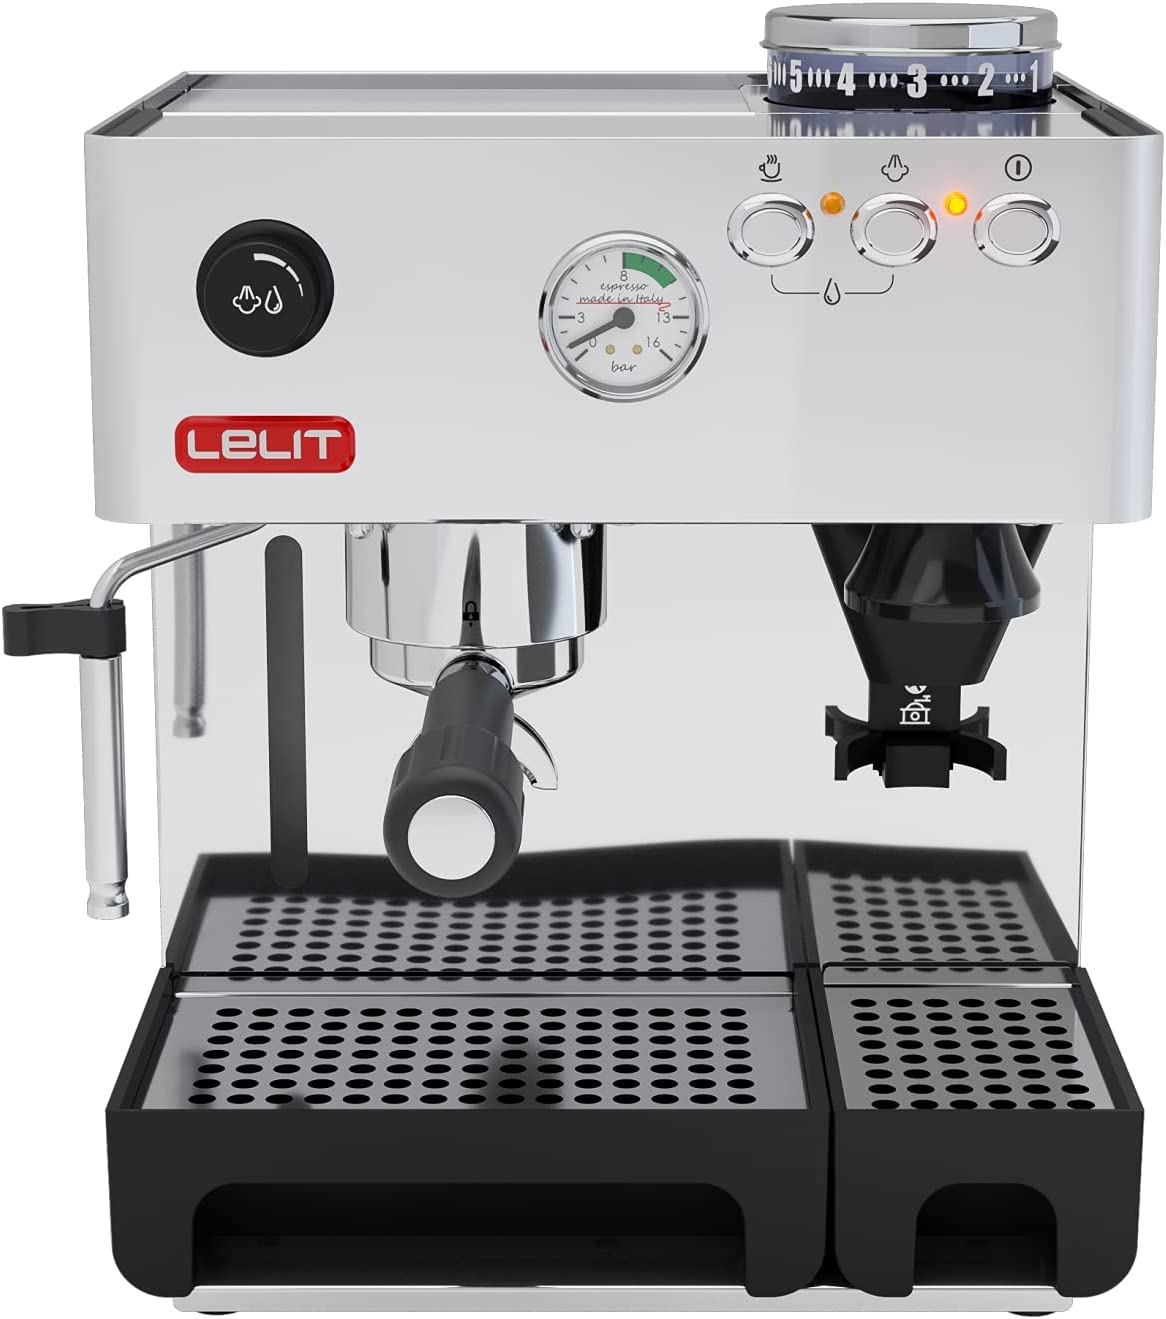 Lelit PL 42 EM Anita PL042EM Semi-Professional Coffee Machine with Integrated Coffee Grinder, Ideal for Espresso Cover, Cappuccino and Coffee Pads, Stainless Steel Housing, 18/8, 2 kg, Metal